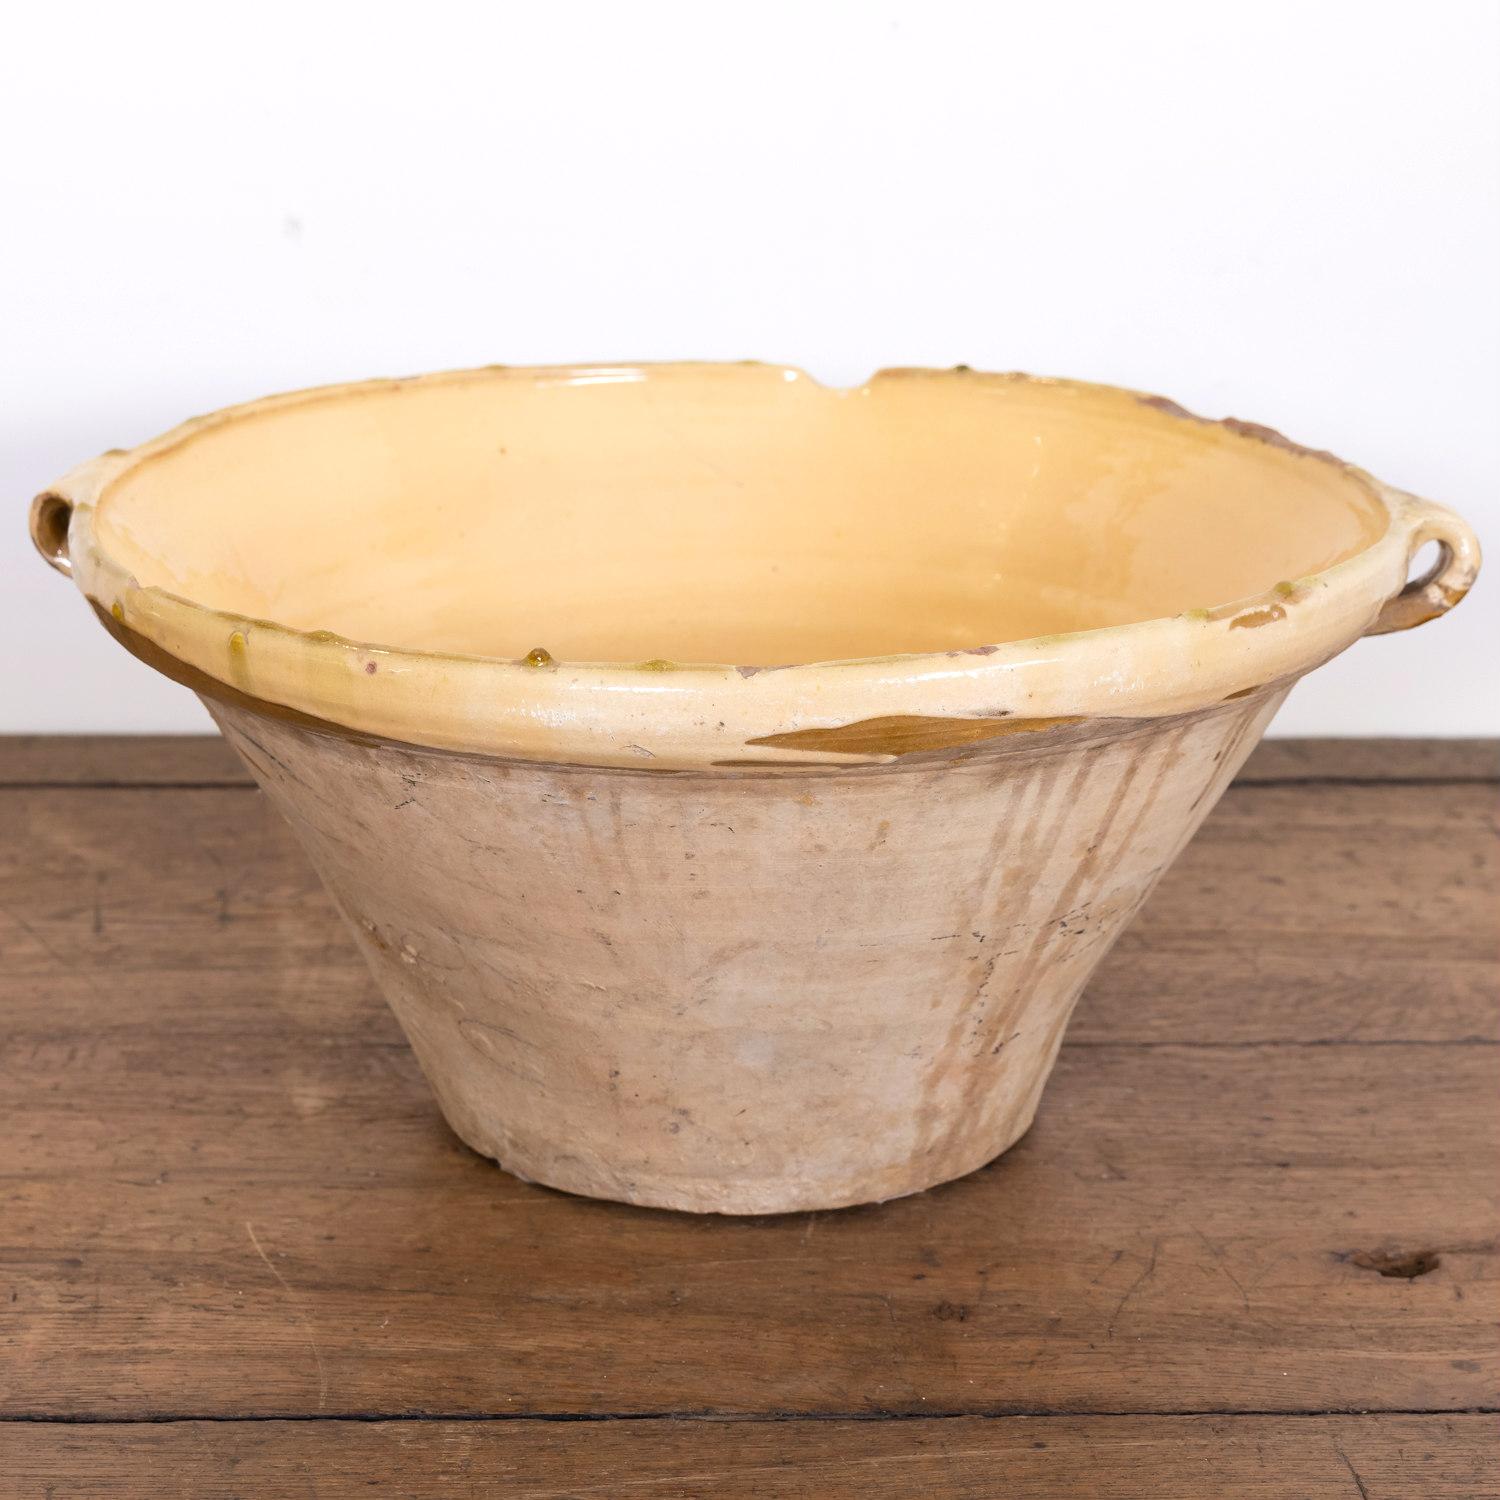 Late 19th Century 19th Century French Terracotta Tian Bowl with Honey Yellow Glaze